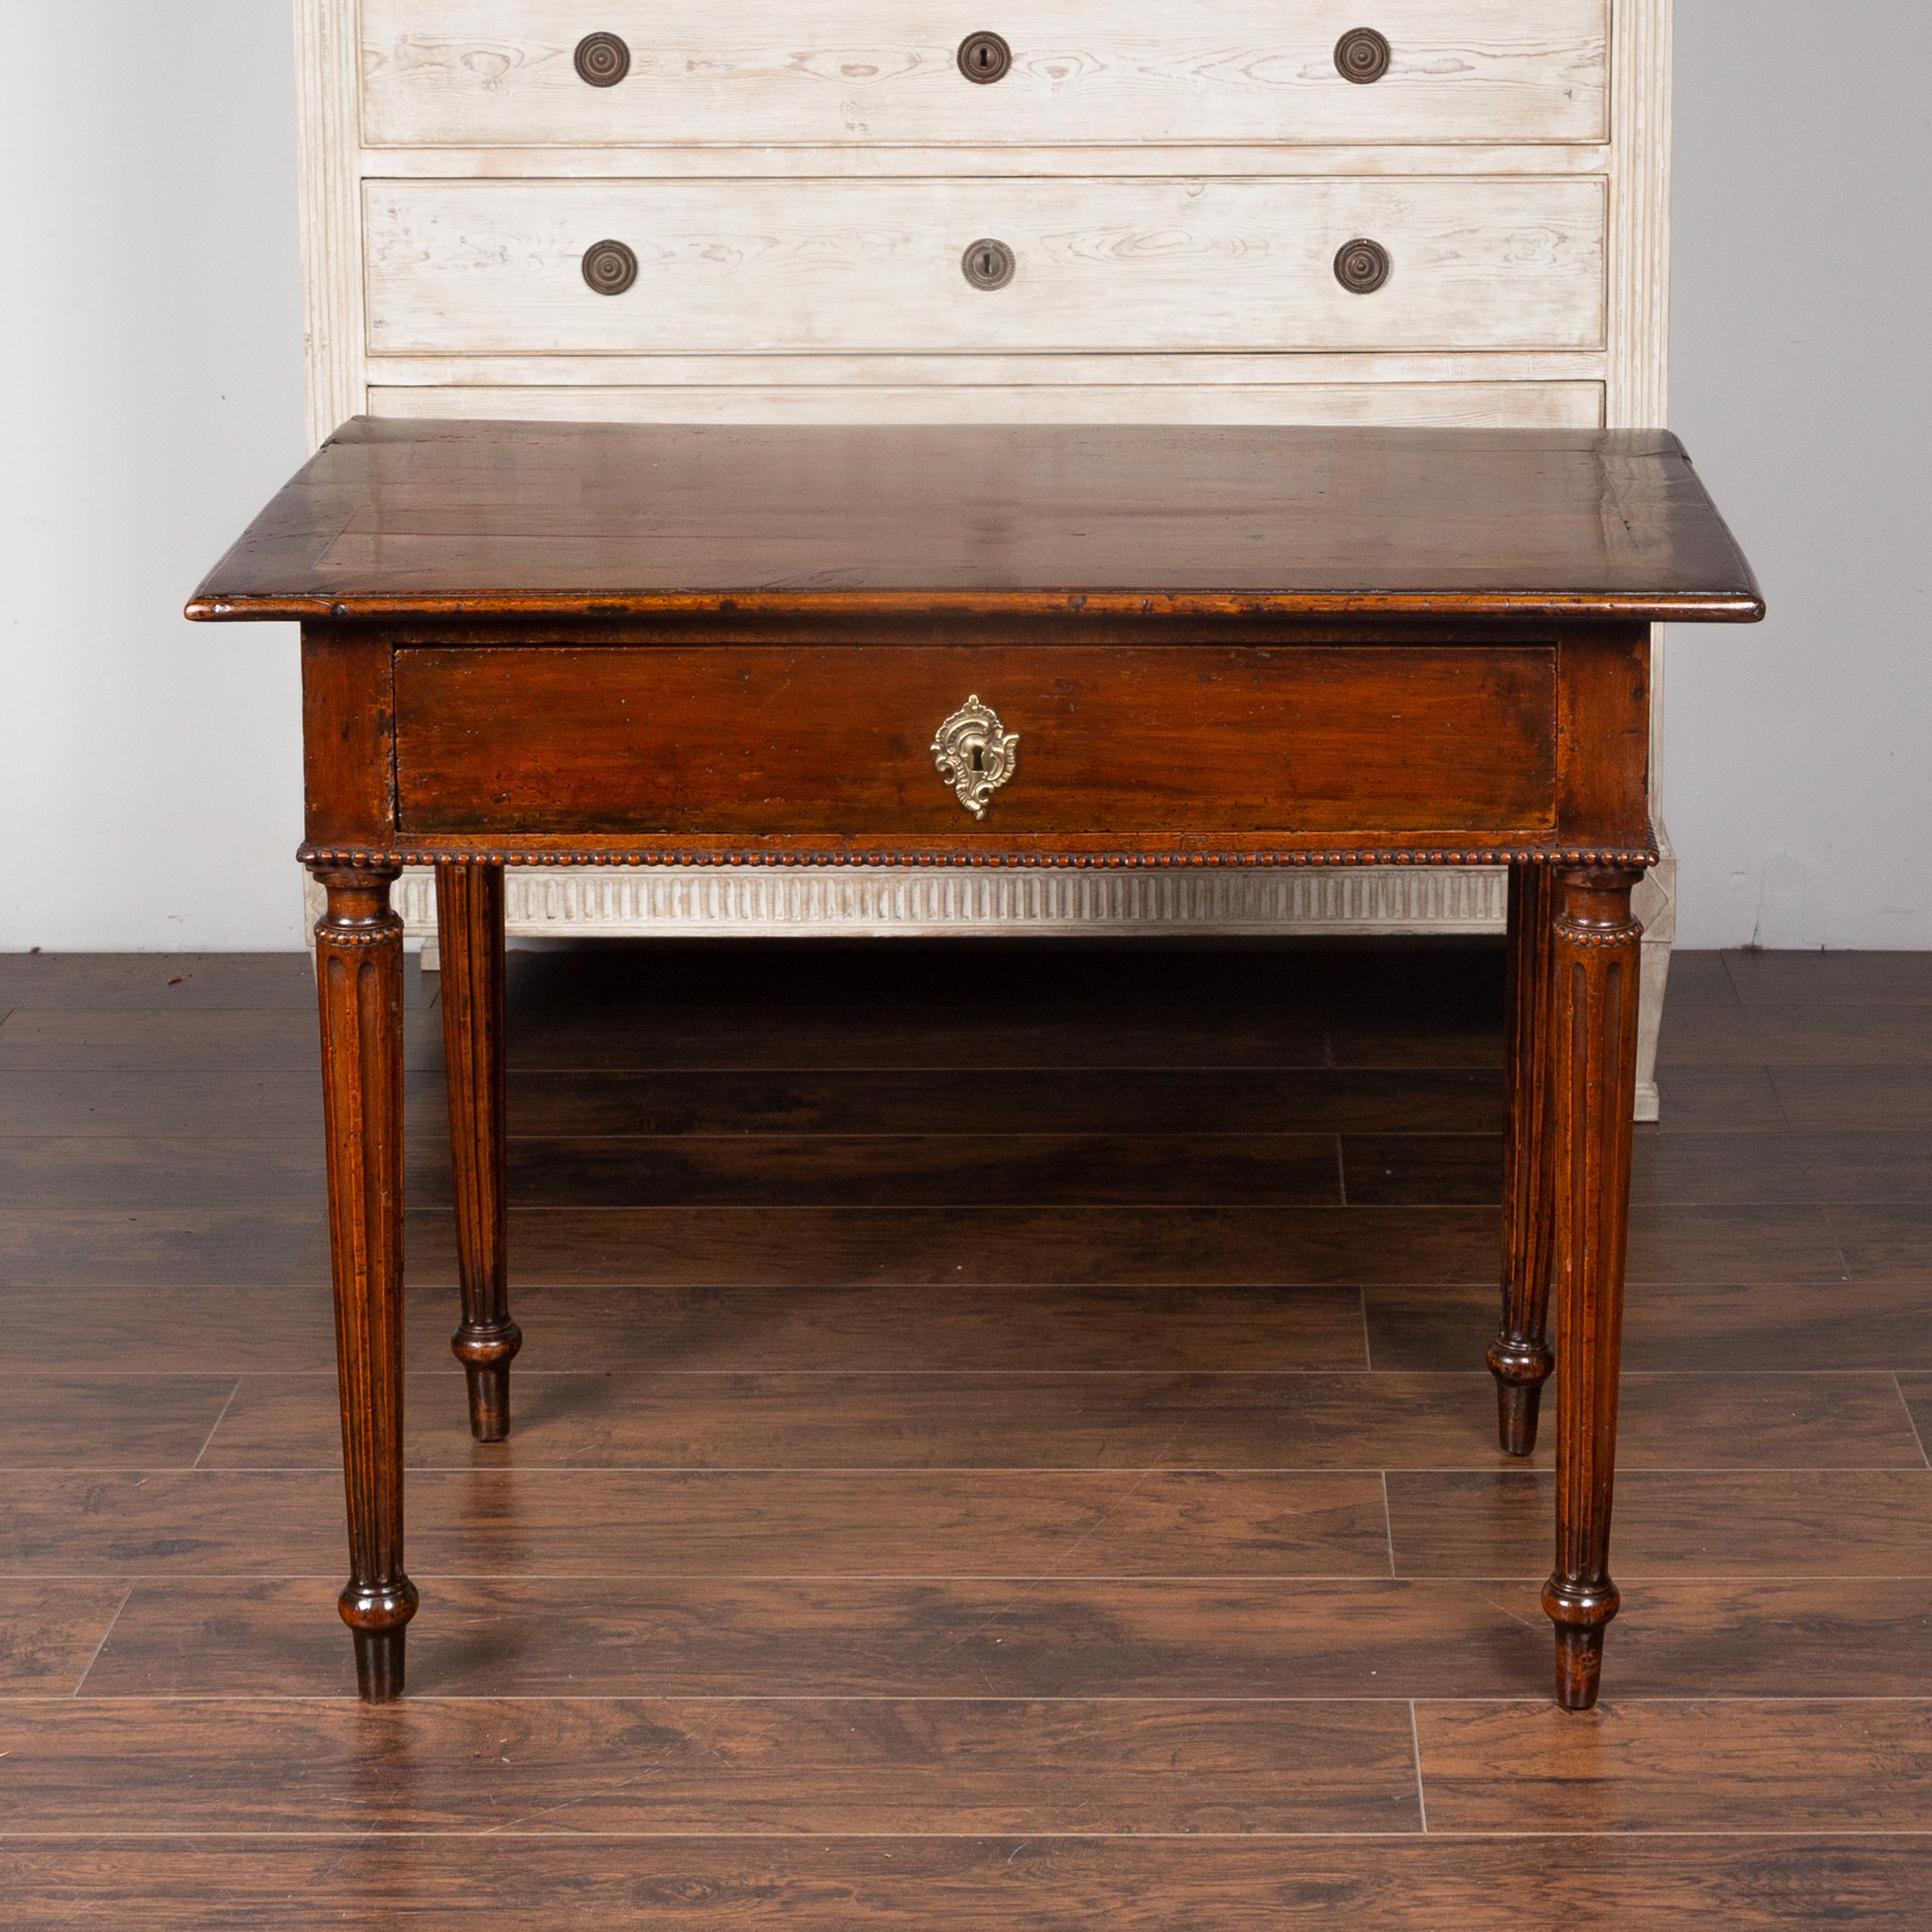 A French neoclassical walnut side table from the early 19th century, with banding, single drawer, beading and fluted legs. Born in France during the early years of the 19th century, this lovely side table features a rectangular top adorned with